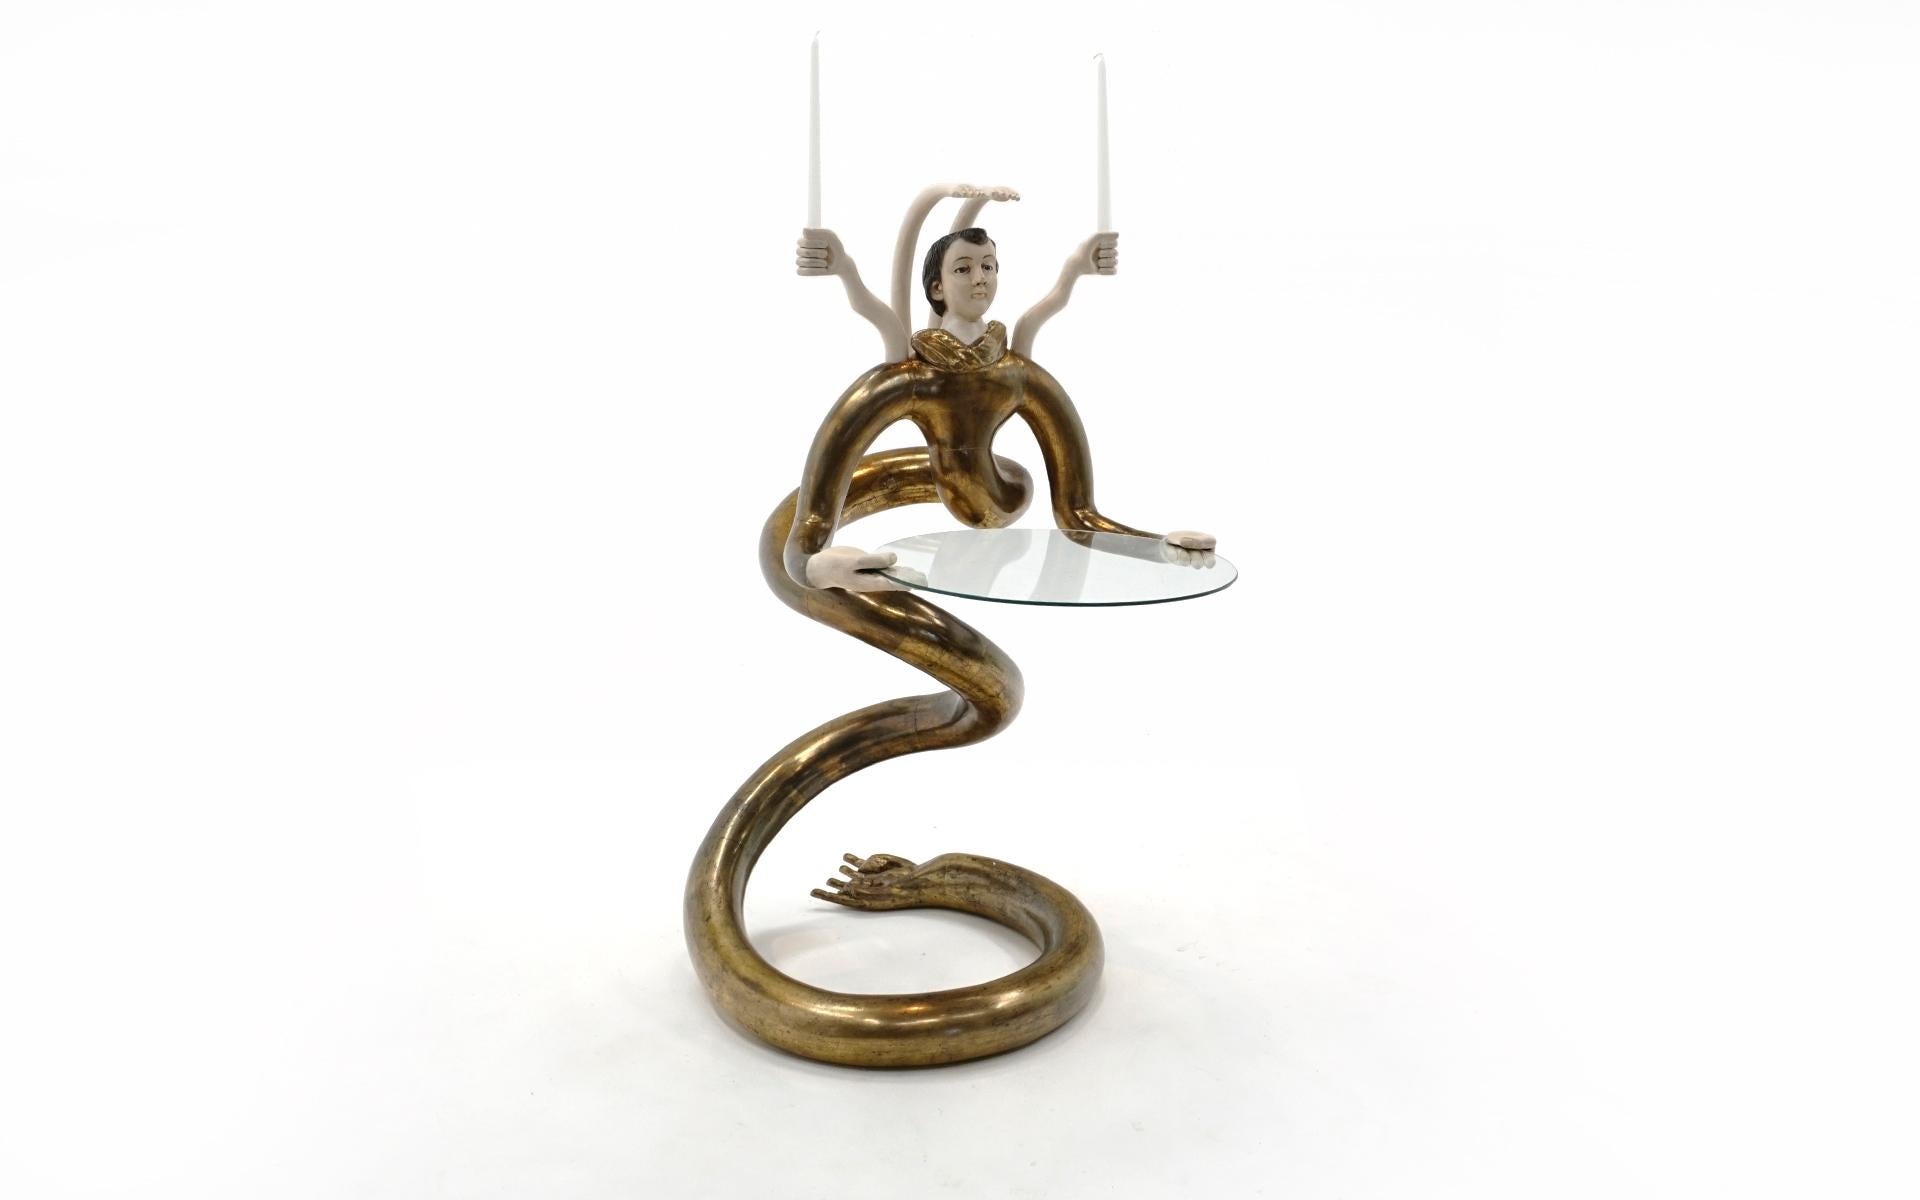 Pedro Friedeberg Snake bar, Mexico, c. 1970s. Made of carved and gilt wood, antique statuary, and glass. The stretched out hands hold the round removable glass tray and the upper hands serve as candle holders. This piece has been thoughtfully,